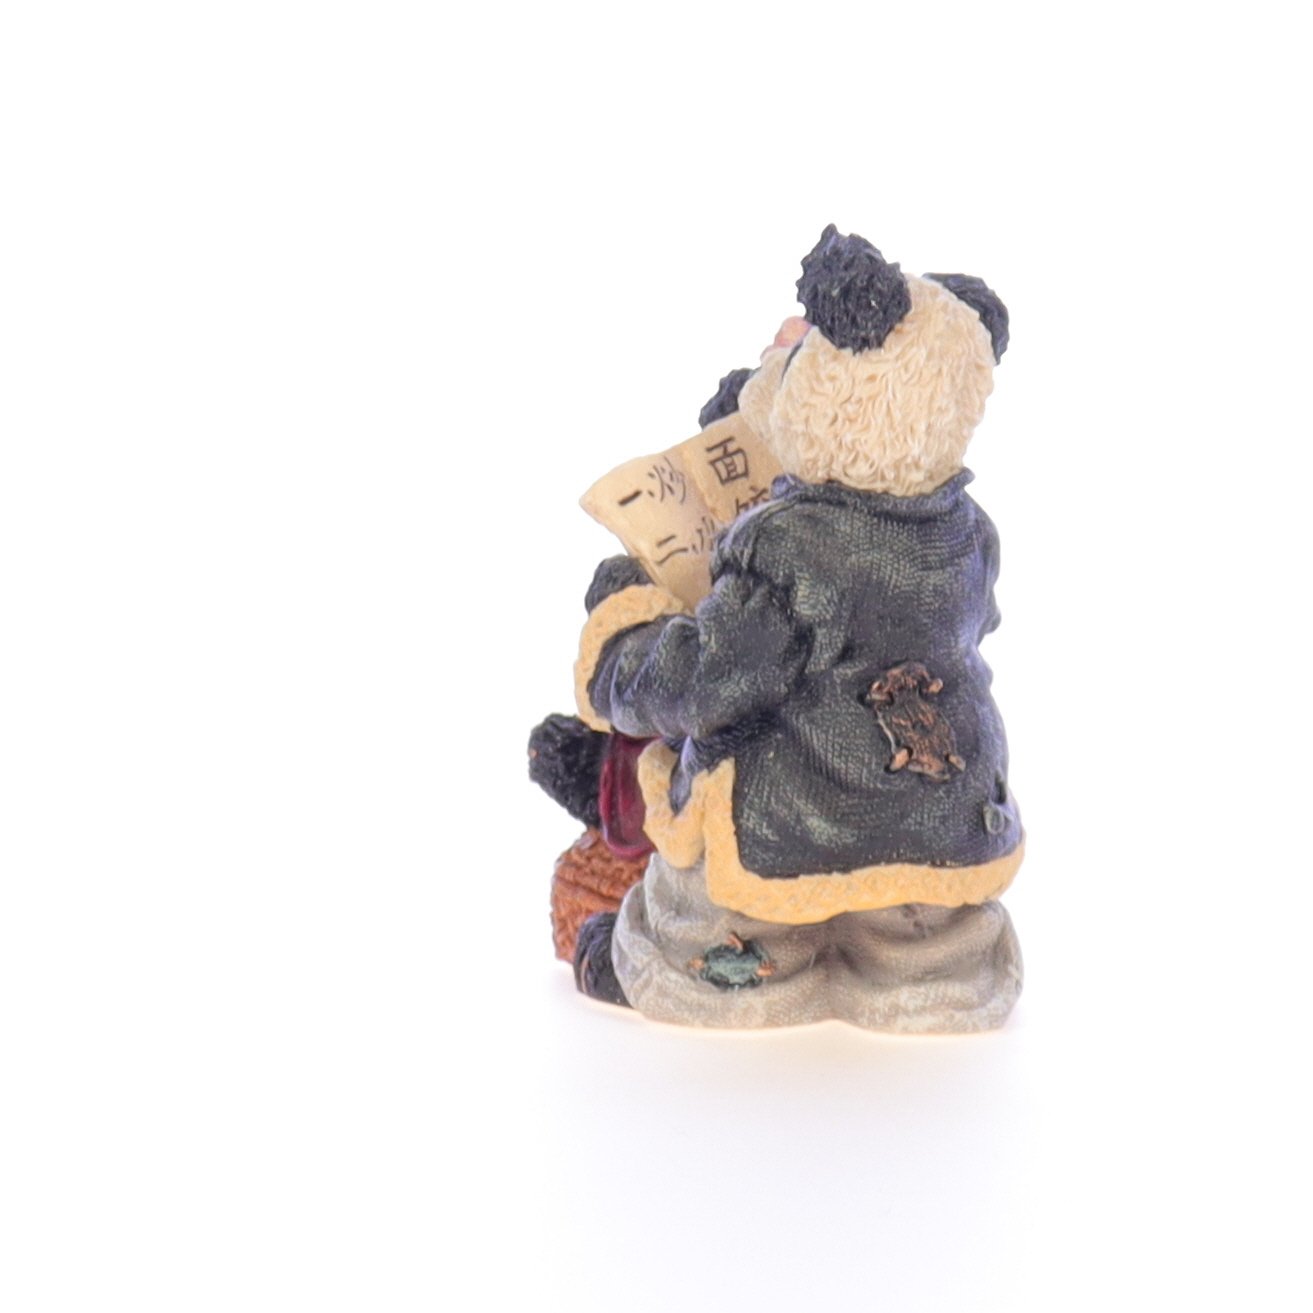 Boyds_Bears_Bearstone_Resin_Figurine_Hsing_Hsing_and_Ling_Ling_Wongbruin_Carryout_2433_04